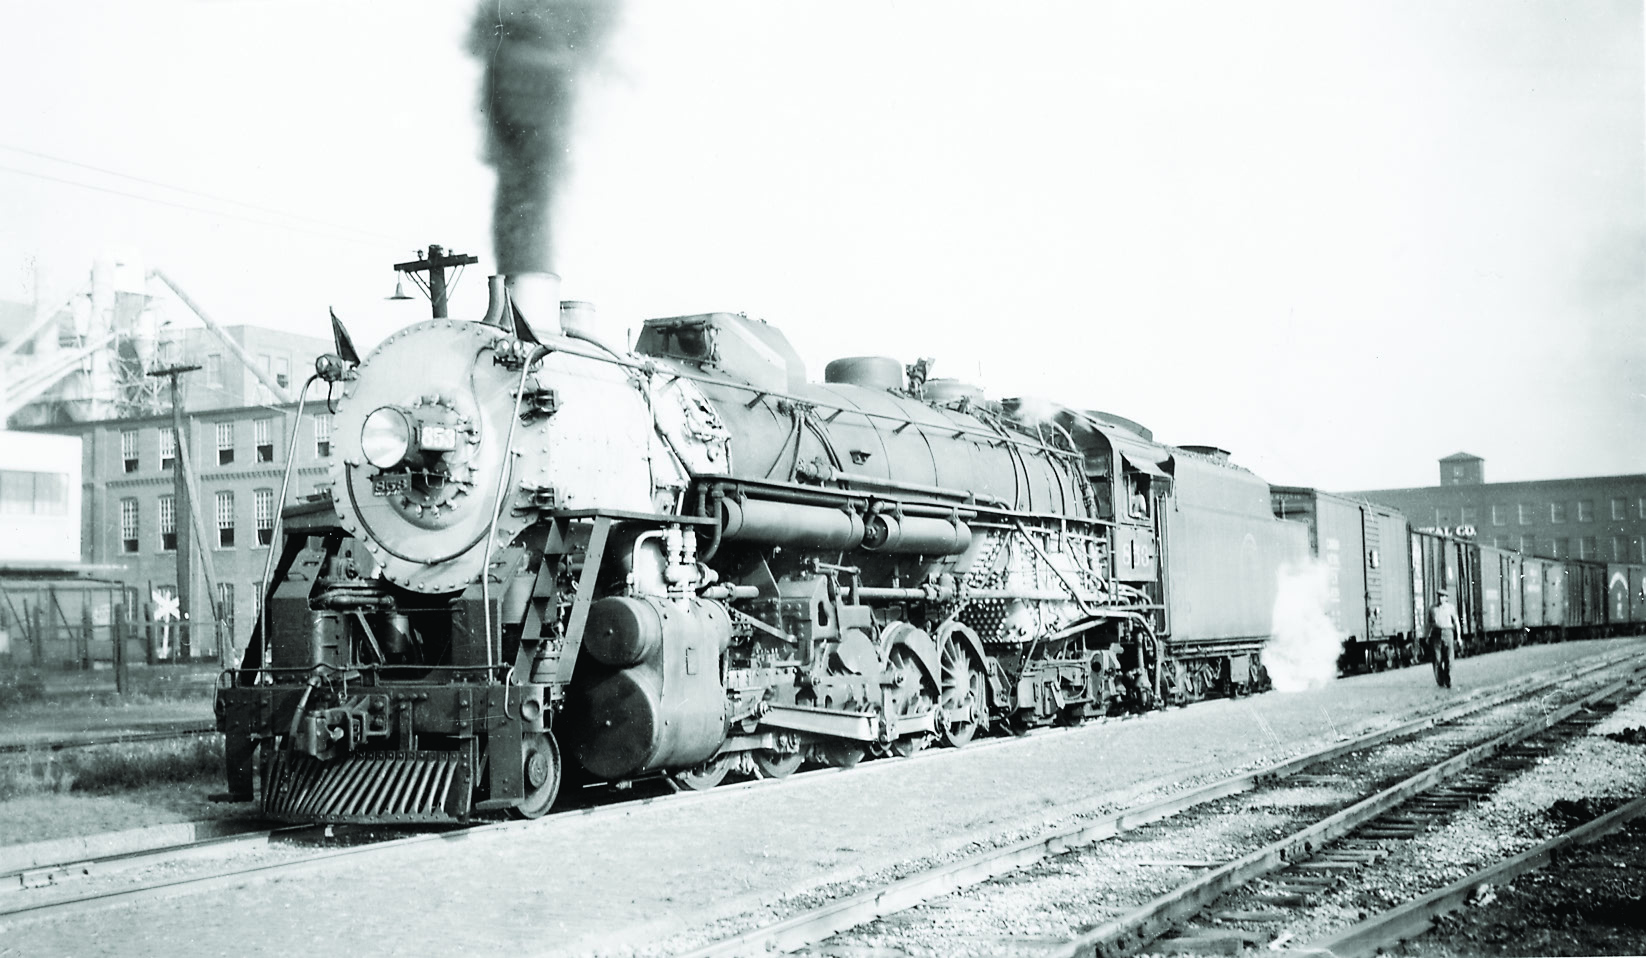 Steam locomotive with freight train in urban setting